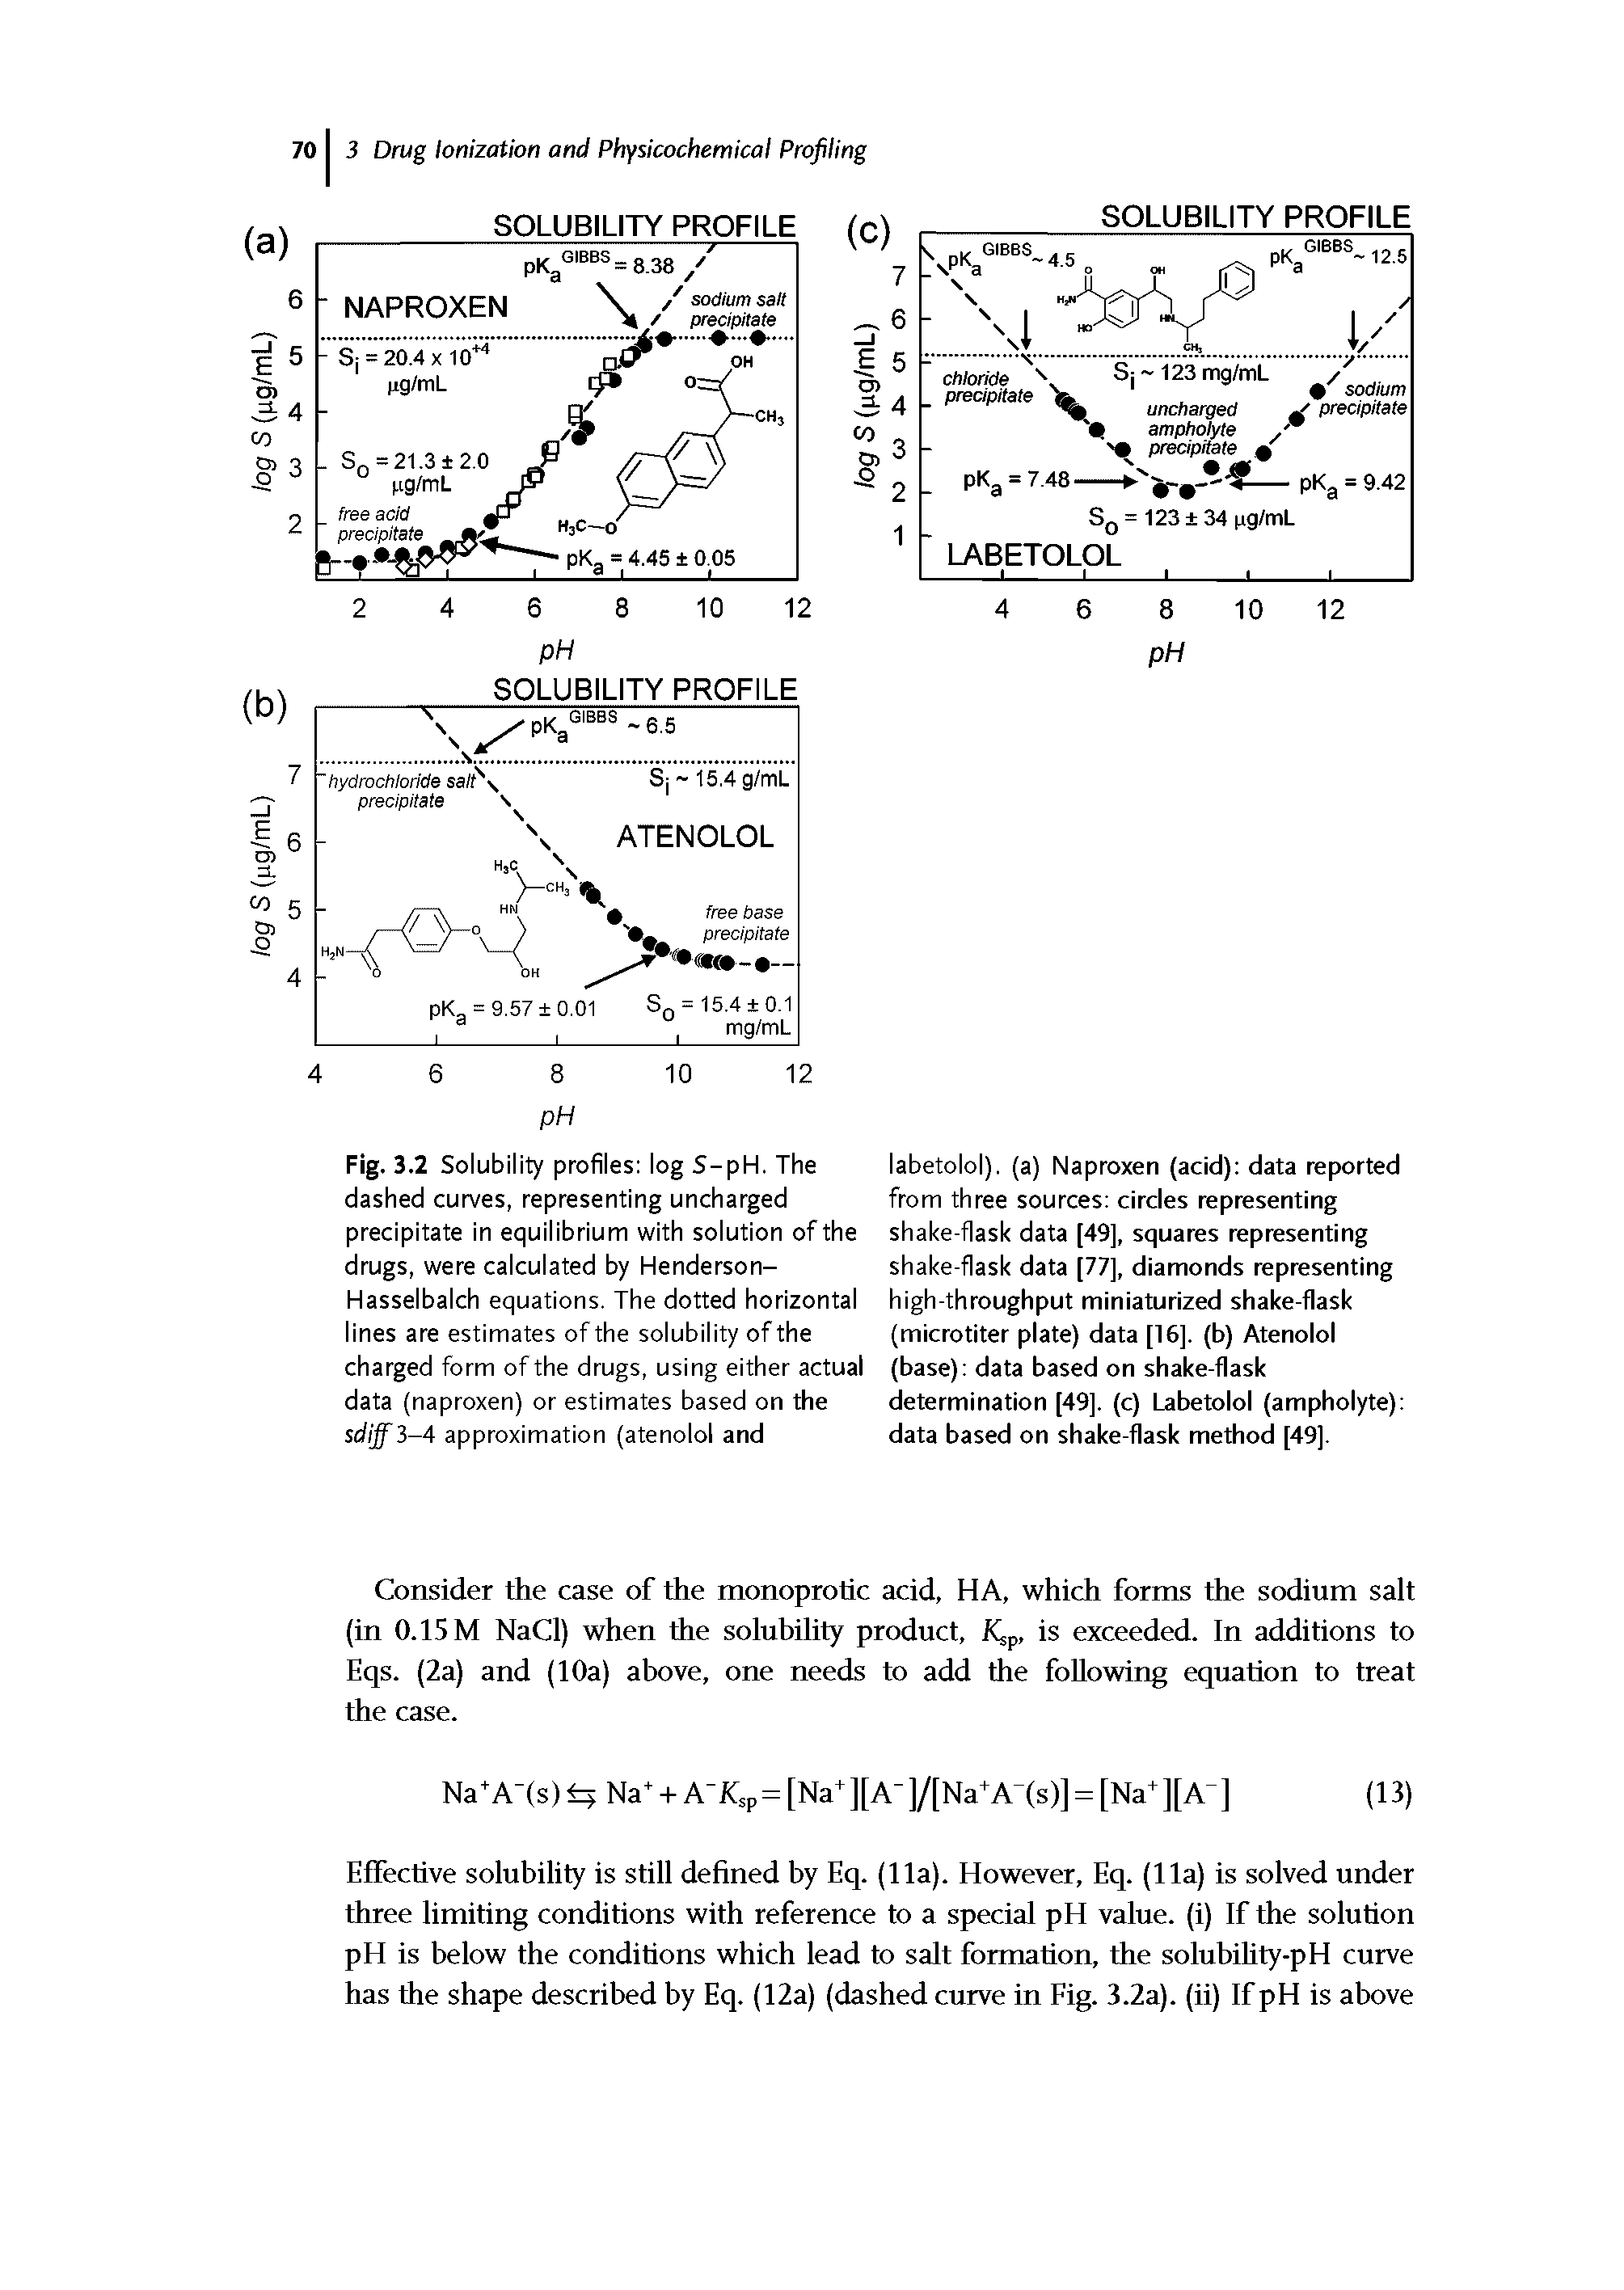 Fig. 3.2 Solubility profiles log S-pH. The dashed curves, representing uncharged precipitate in equilibrium with solution of the drugs, were calculated by Henderson-Hasselbalch equations. The dotted horizontal lines are estimates of the solubility of the charged form of the drugs, using either actual data (naproxen) or estimates based on the sdiff 3-4 approximation (atenolol and...